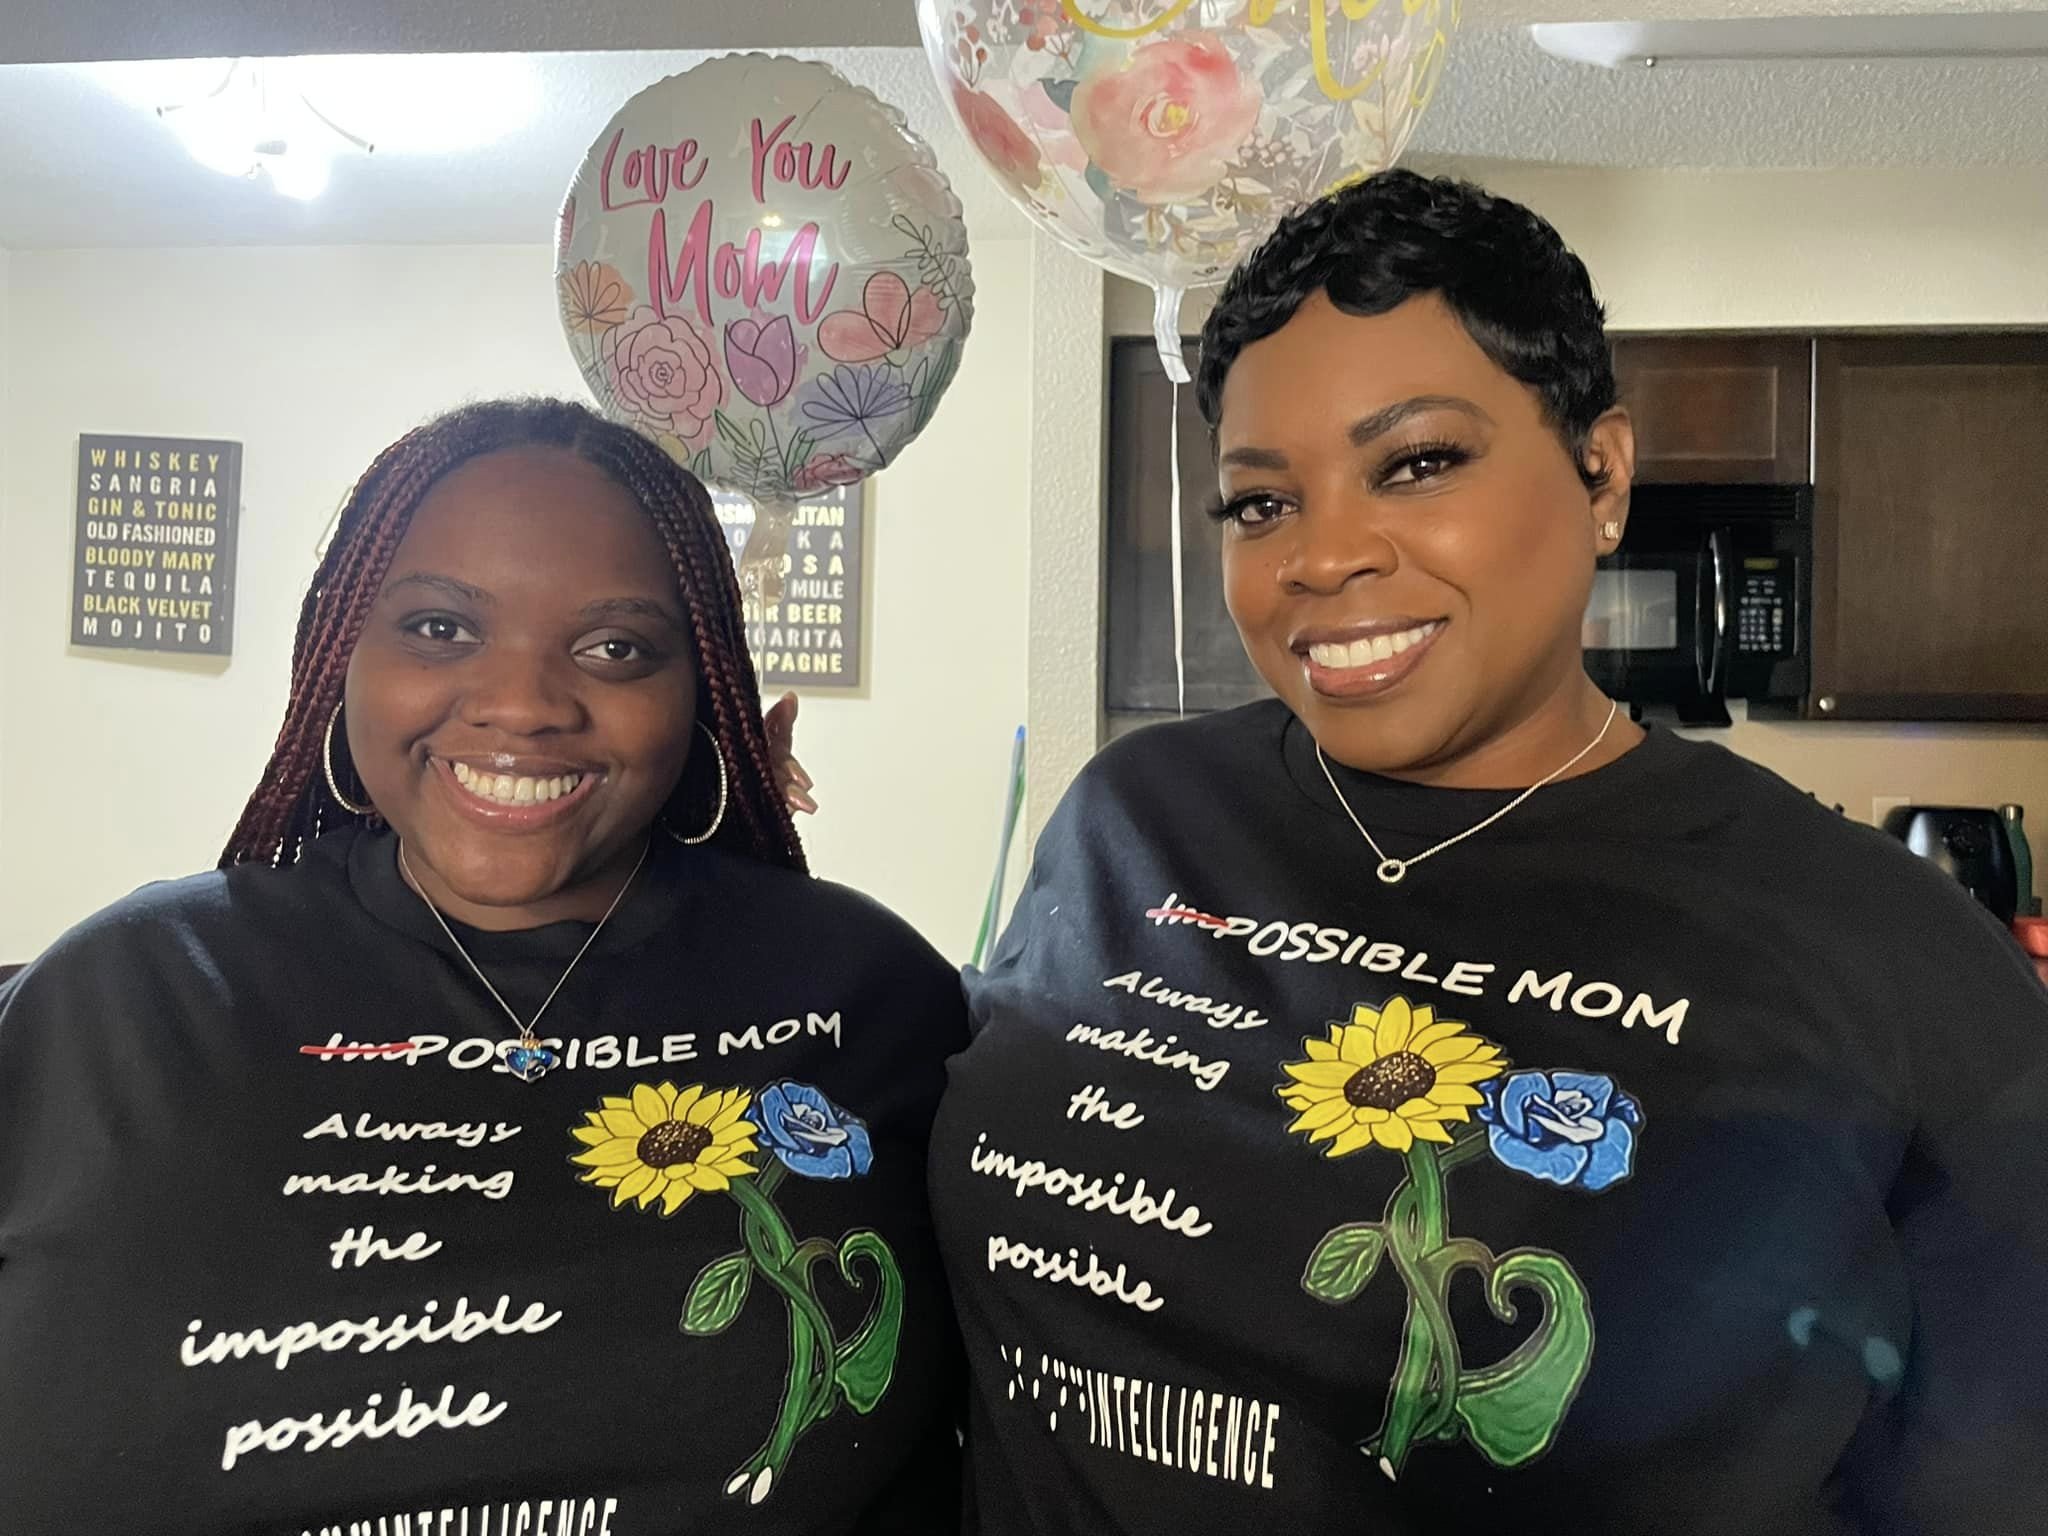 This picture is an image of Professor Blindie and and her mother standing together in a kitchen smiling, with baloons in the background the baloons say love you mom.  They are both wearing a black t-shirt with white letters that read IMPOSSOBLE MOM with the a red slash over the IM.  Always making the Impossible Possible, Blind Intelligence.  Their is Sunflower and a blue flower artwork on the side of the letters.